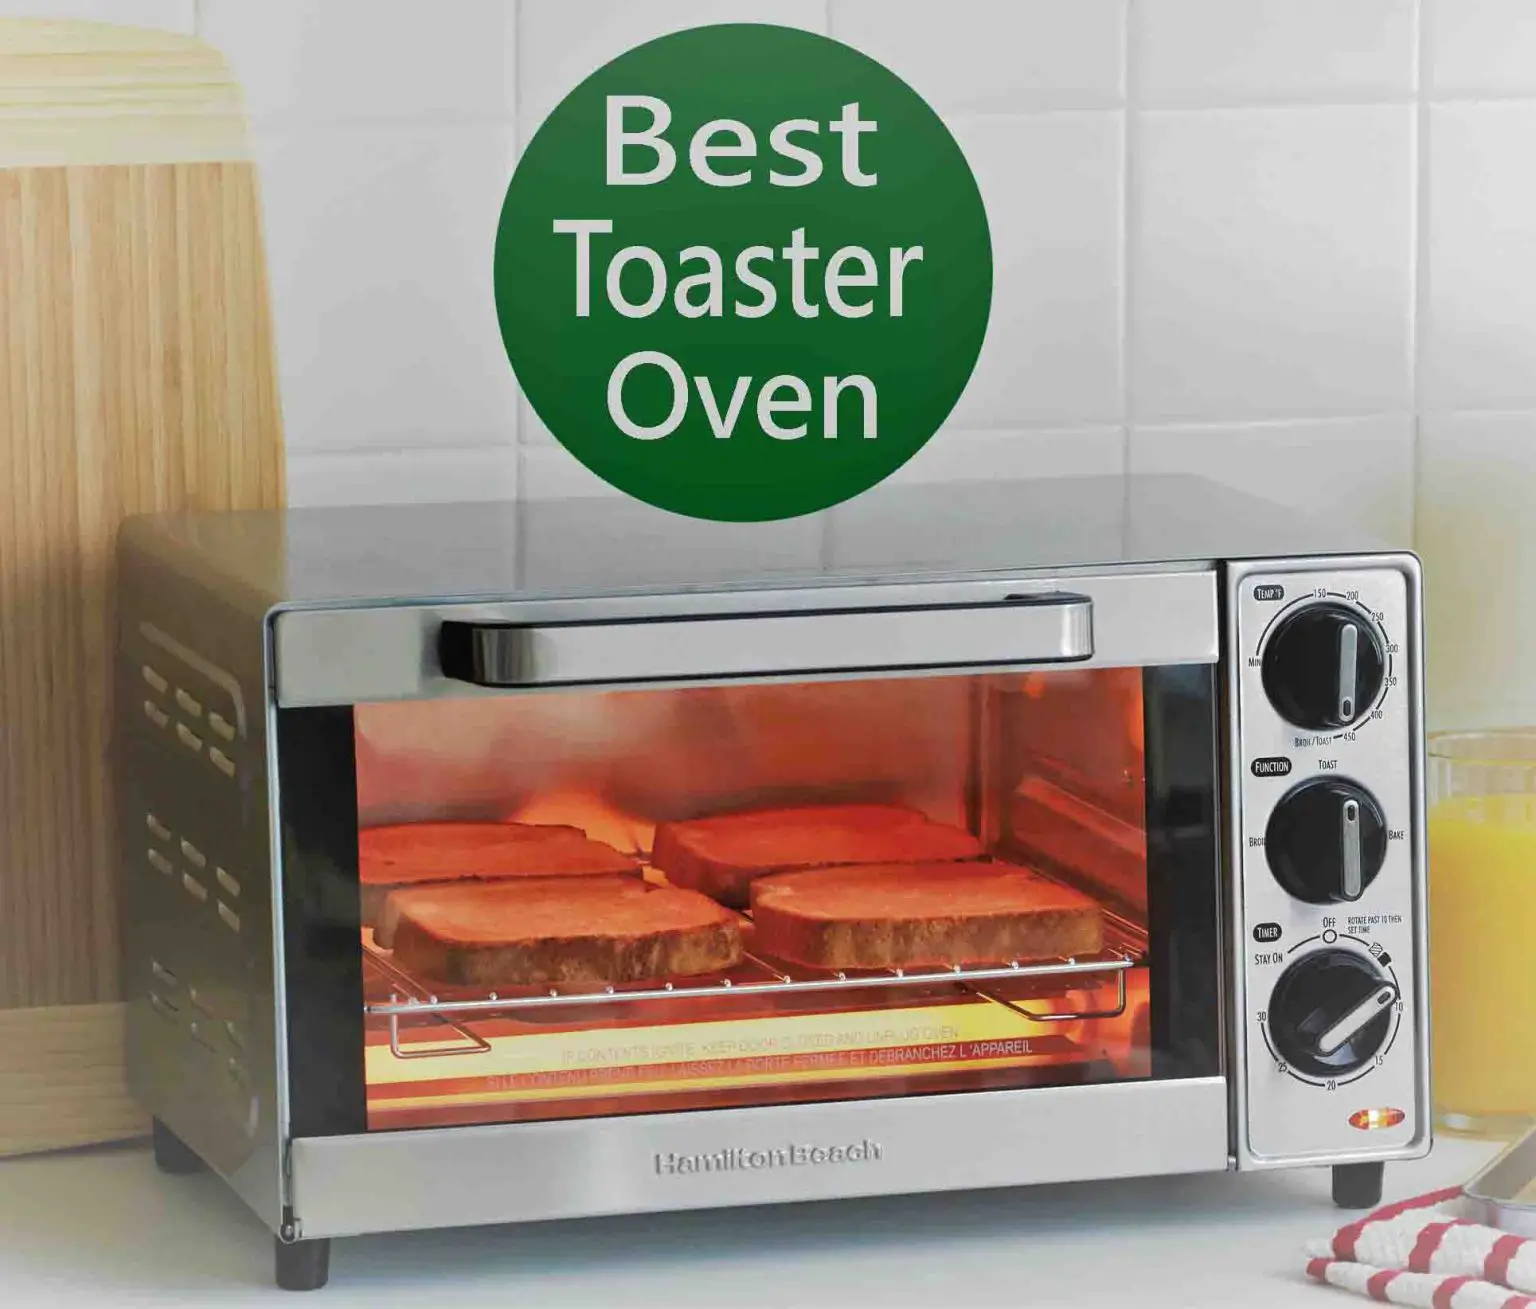 Top 10 Best Toaster Oven Air Fryer Made In USA Of 2021